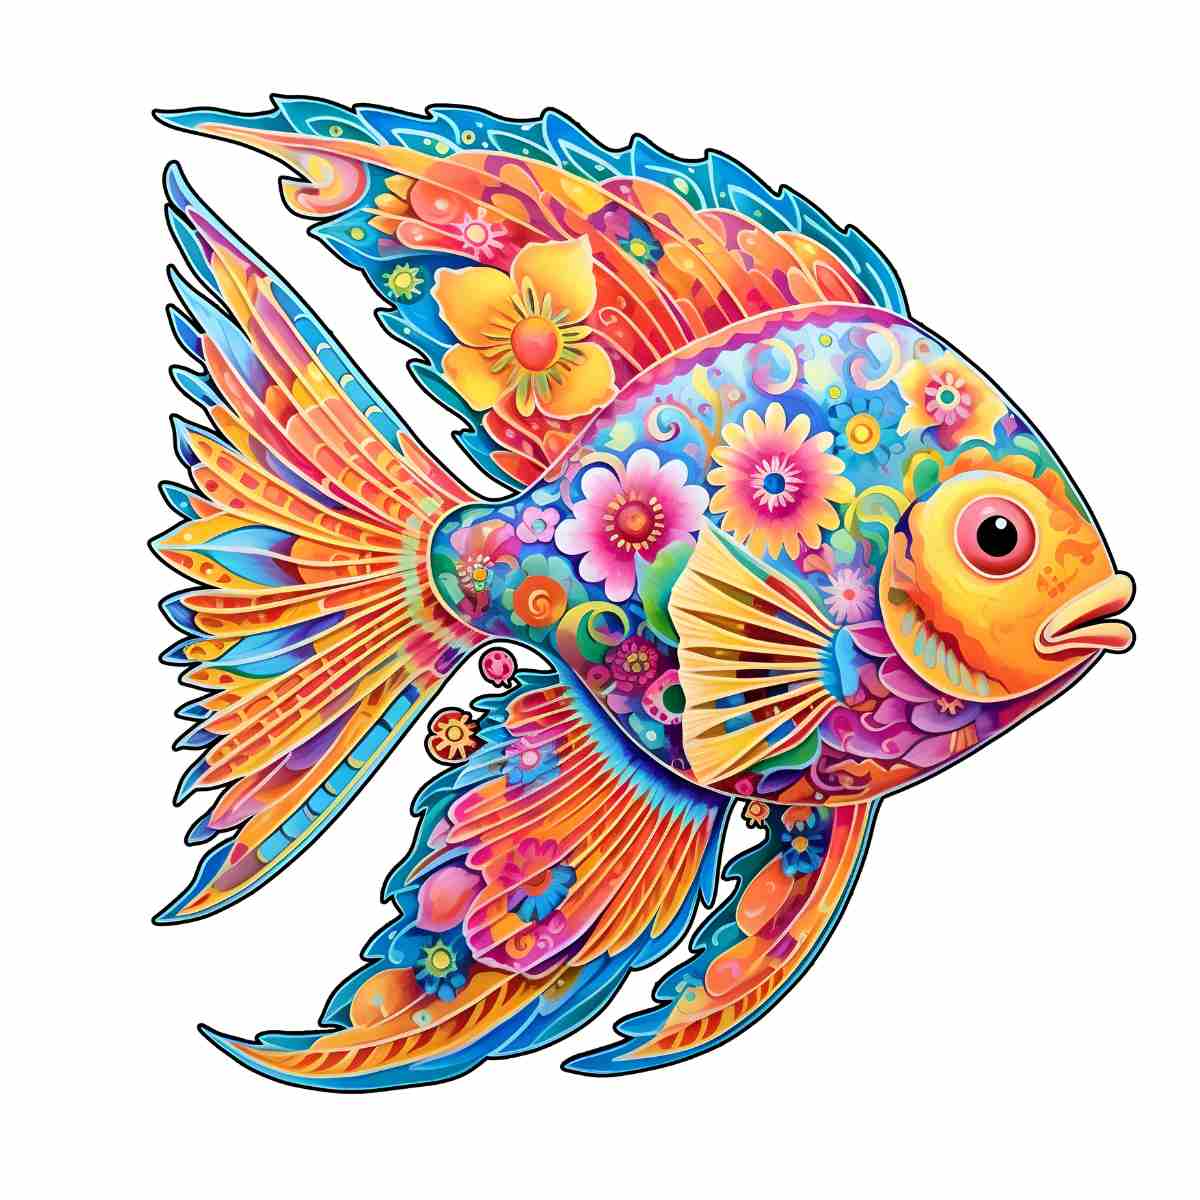 Animal Jigsaw Puzzle > Wooden Jigsaw Puzzle > Jigsaw Puzzle A5 Fish- Jigsaw Puzzle